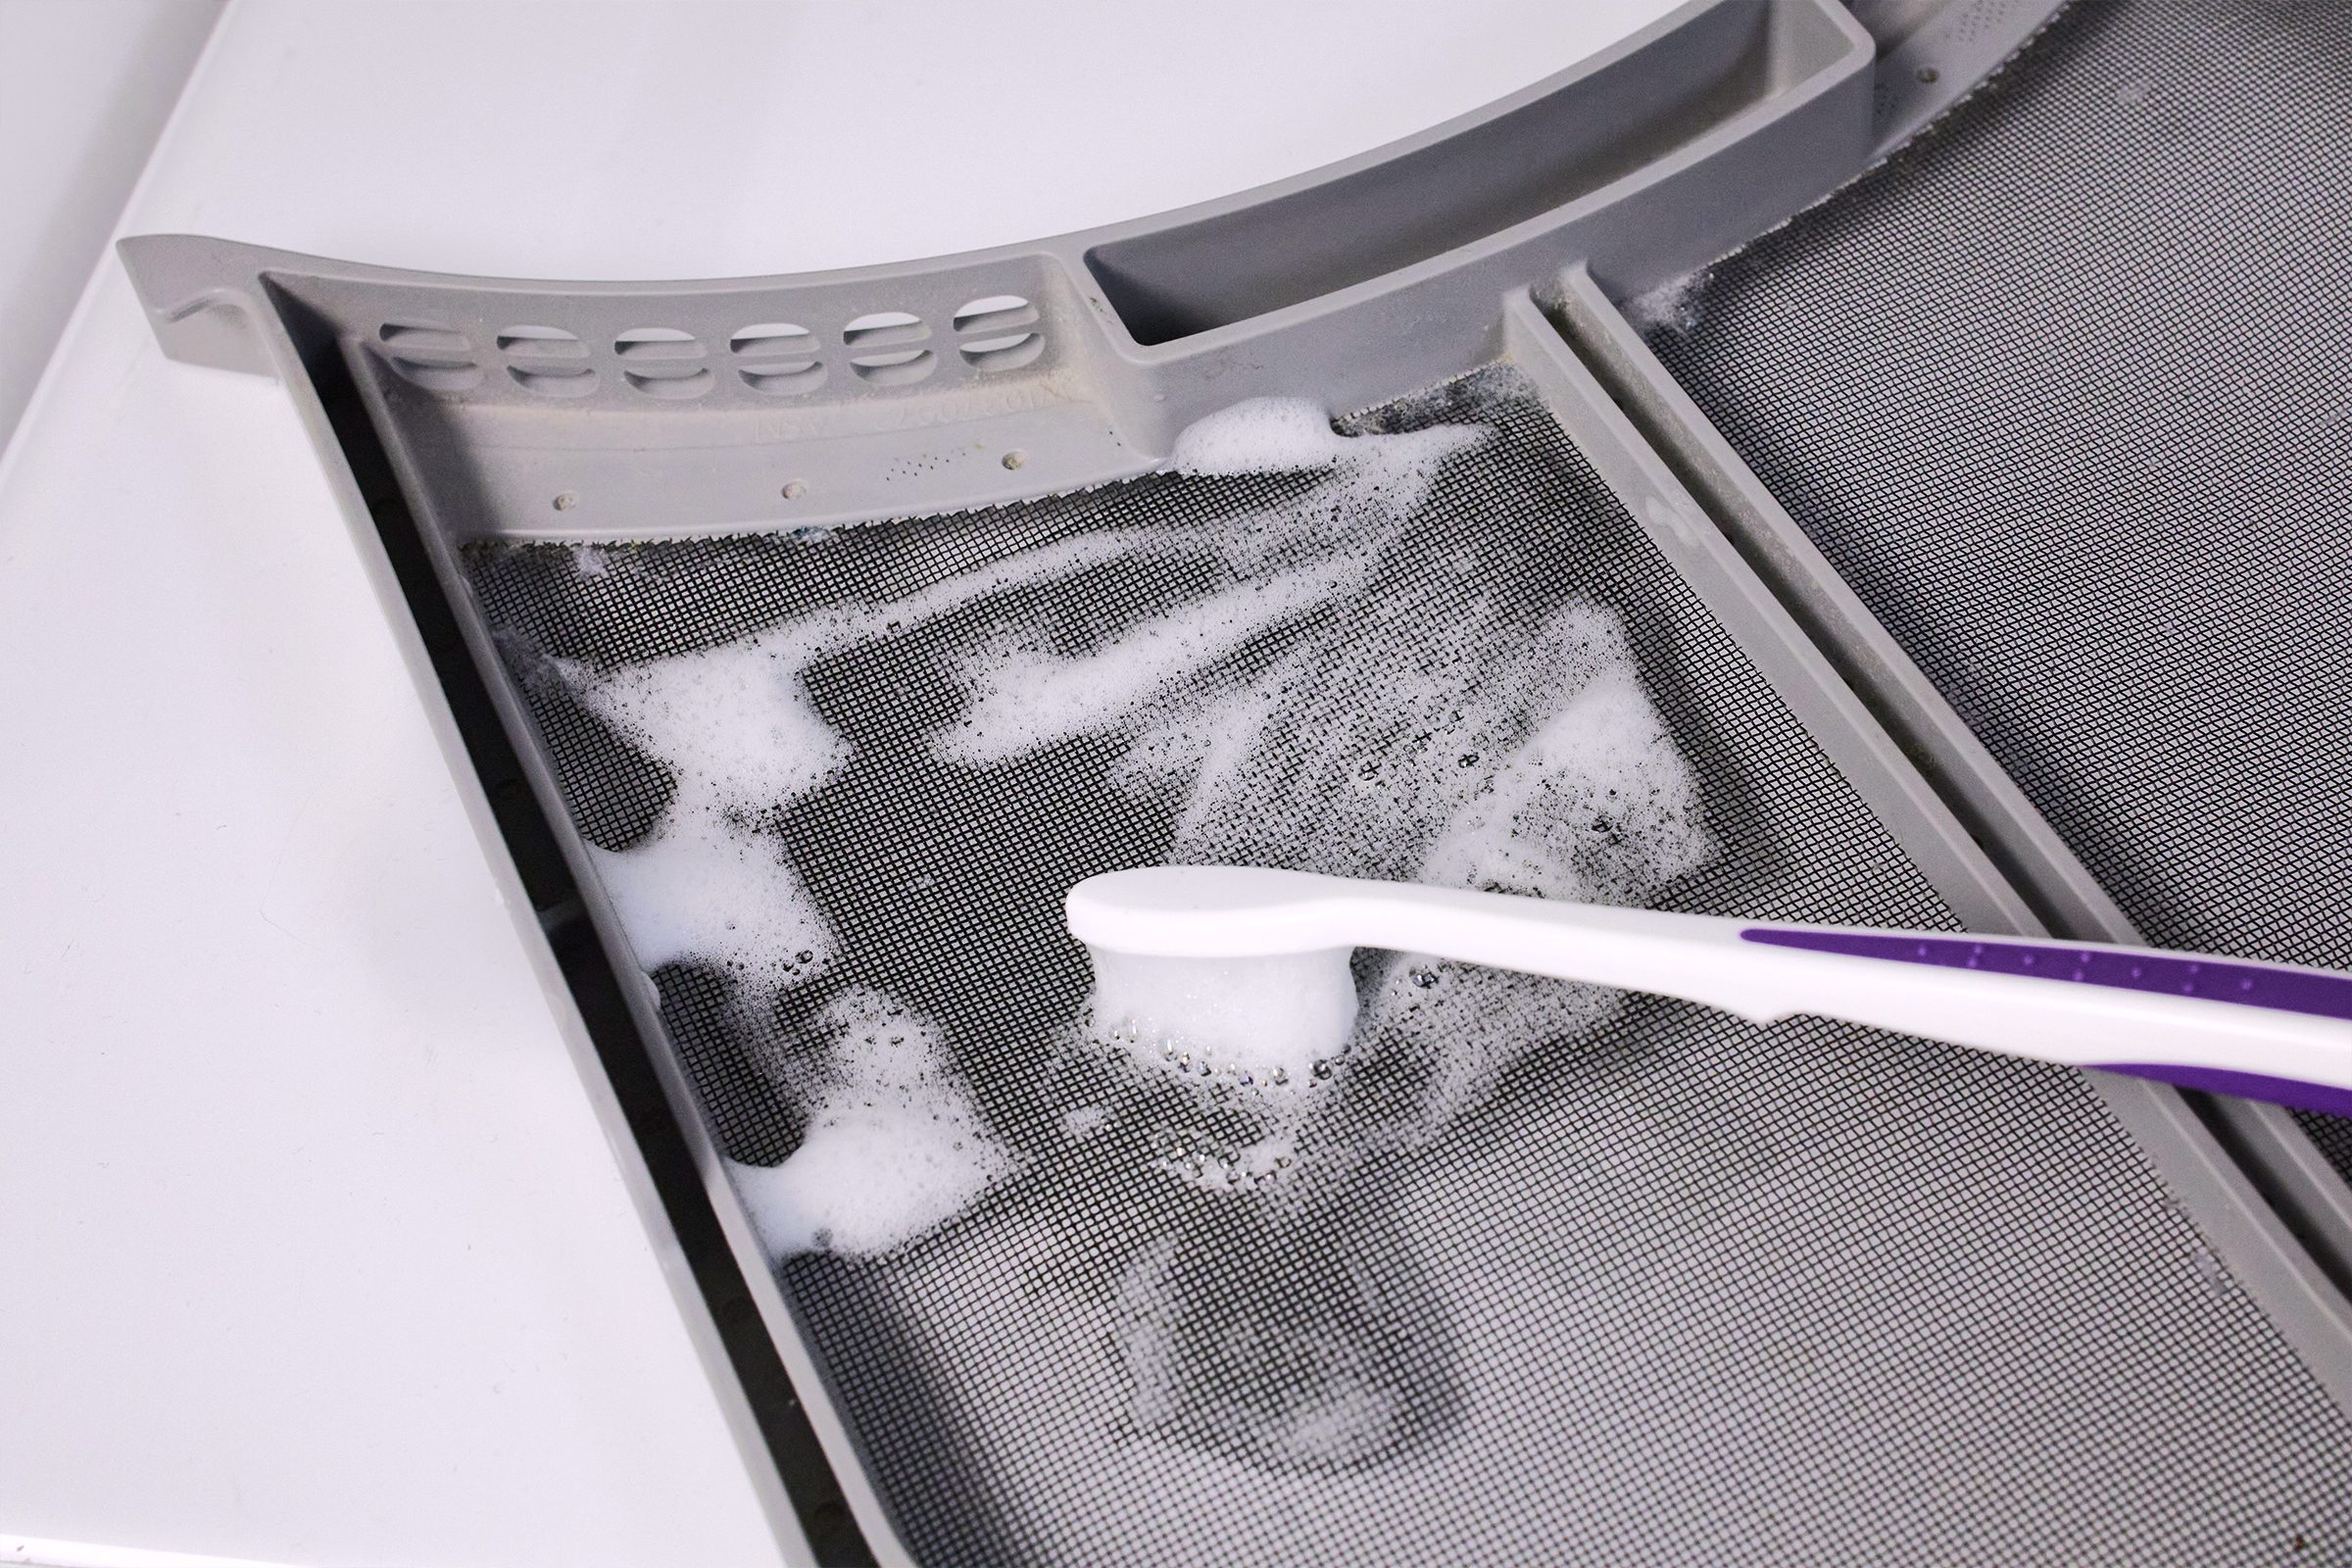 Cleaning A Dryer Lint Trap with toothbrush